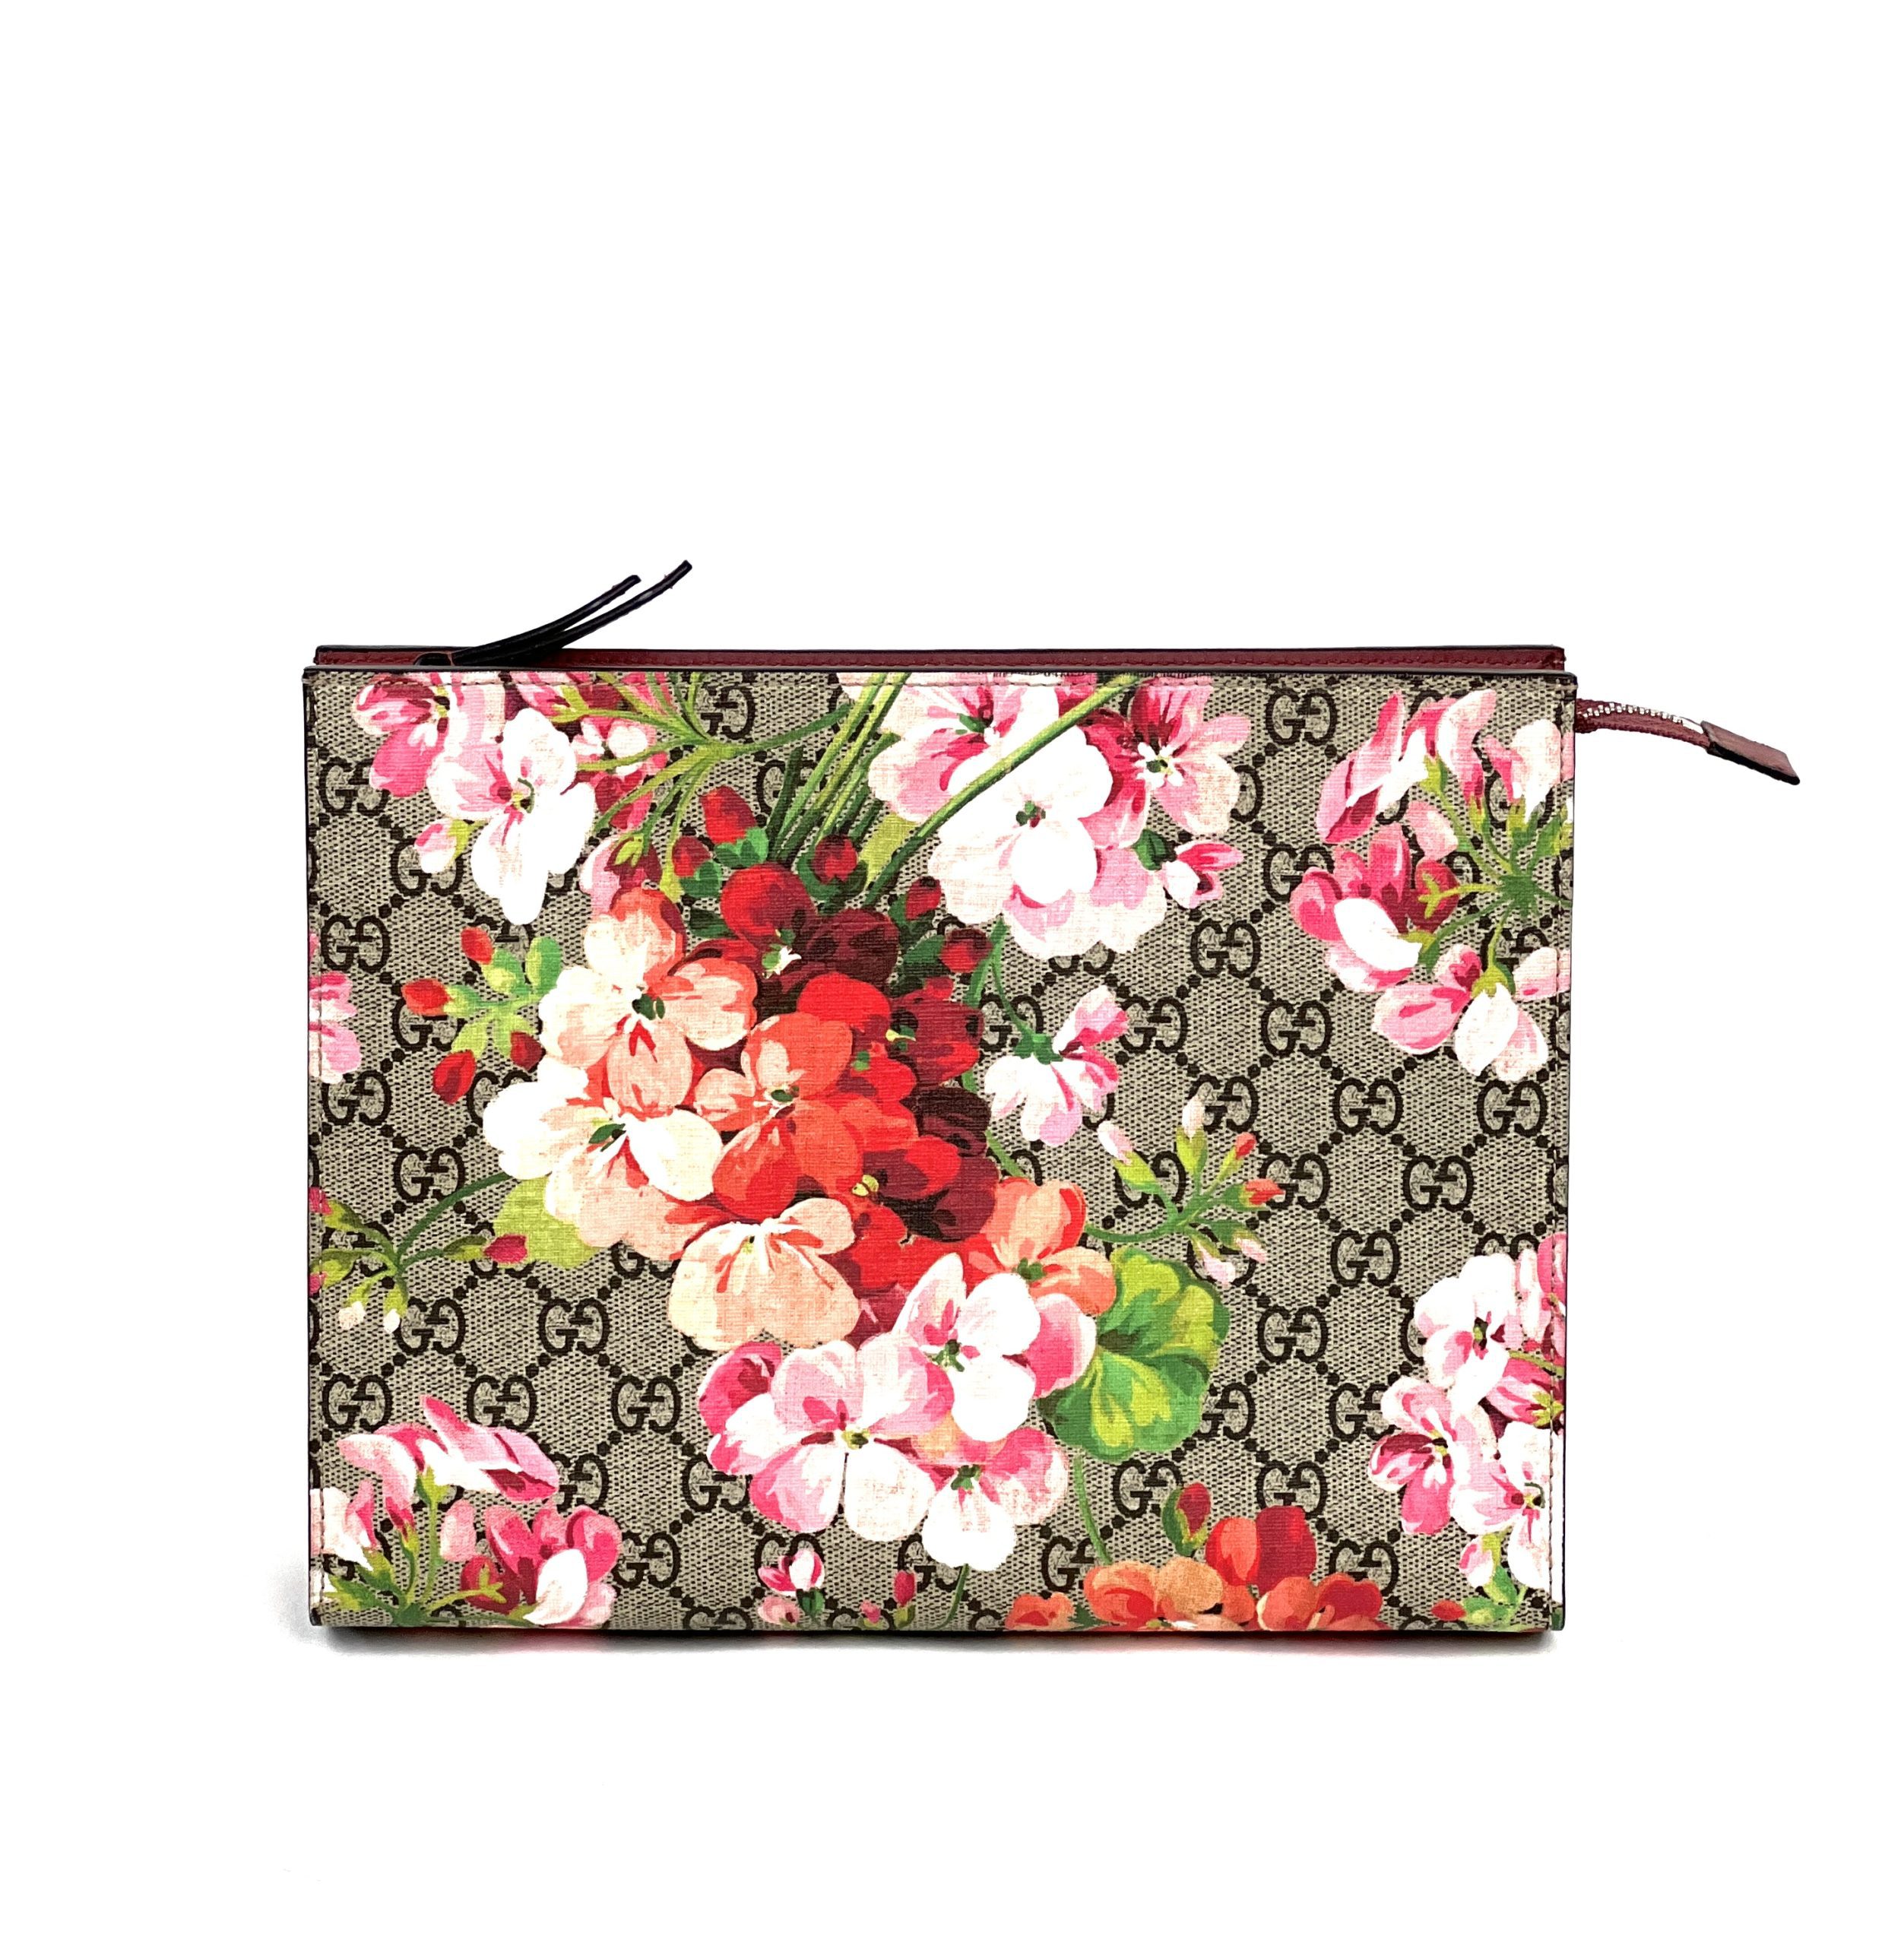 NEW Gucci Bloom Pouch